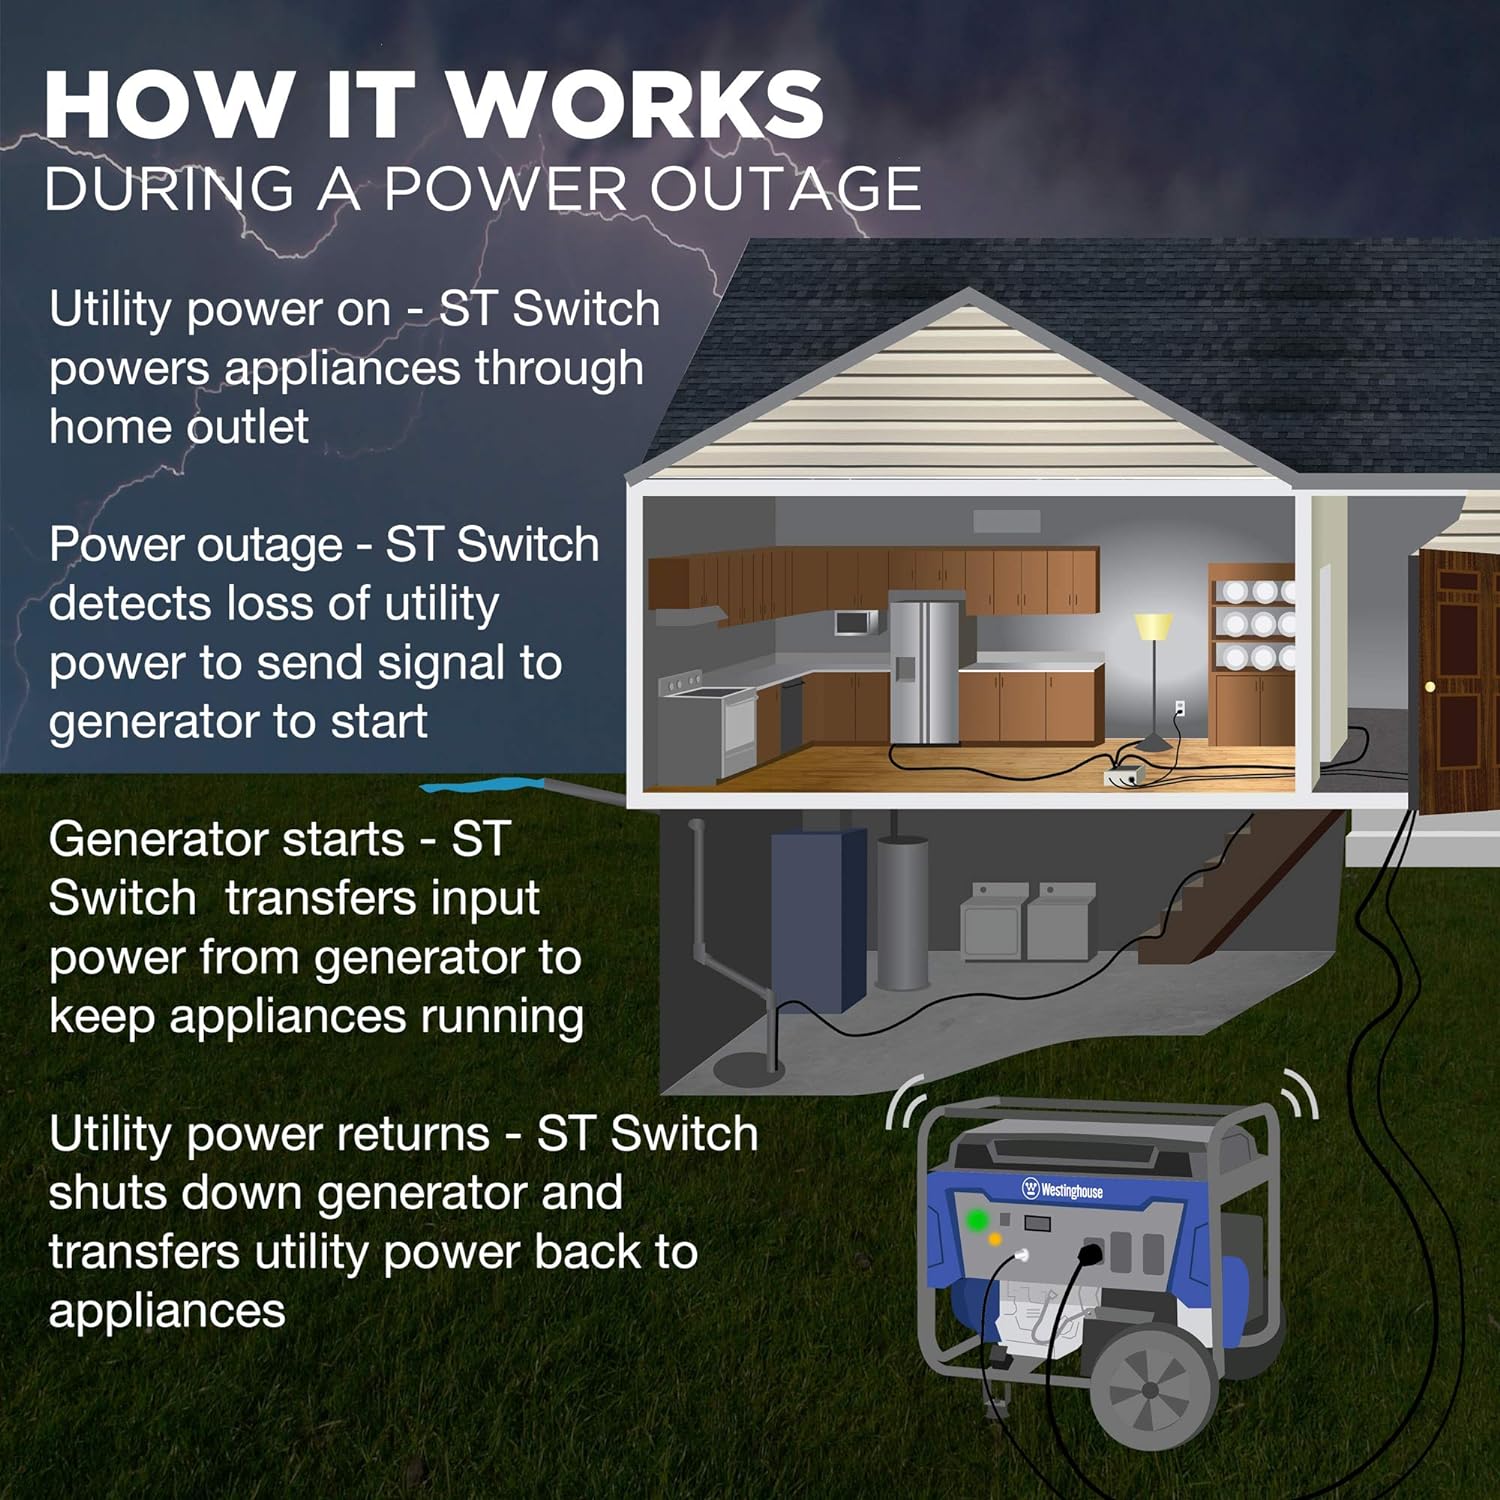 Westinghouse Outdoor Power Equipment ST Switch with Smart Portable Automatic Transfer Technology Home Standby Alternative, For Sump Pumps, Refrigerators, and More, Black and White - Westinghouse ST Switch Review